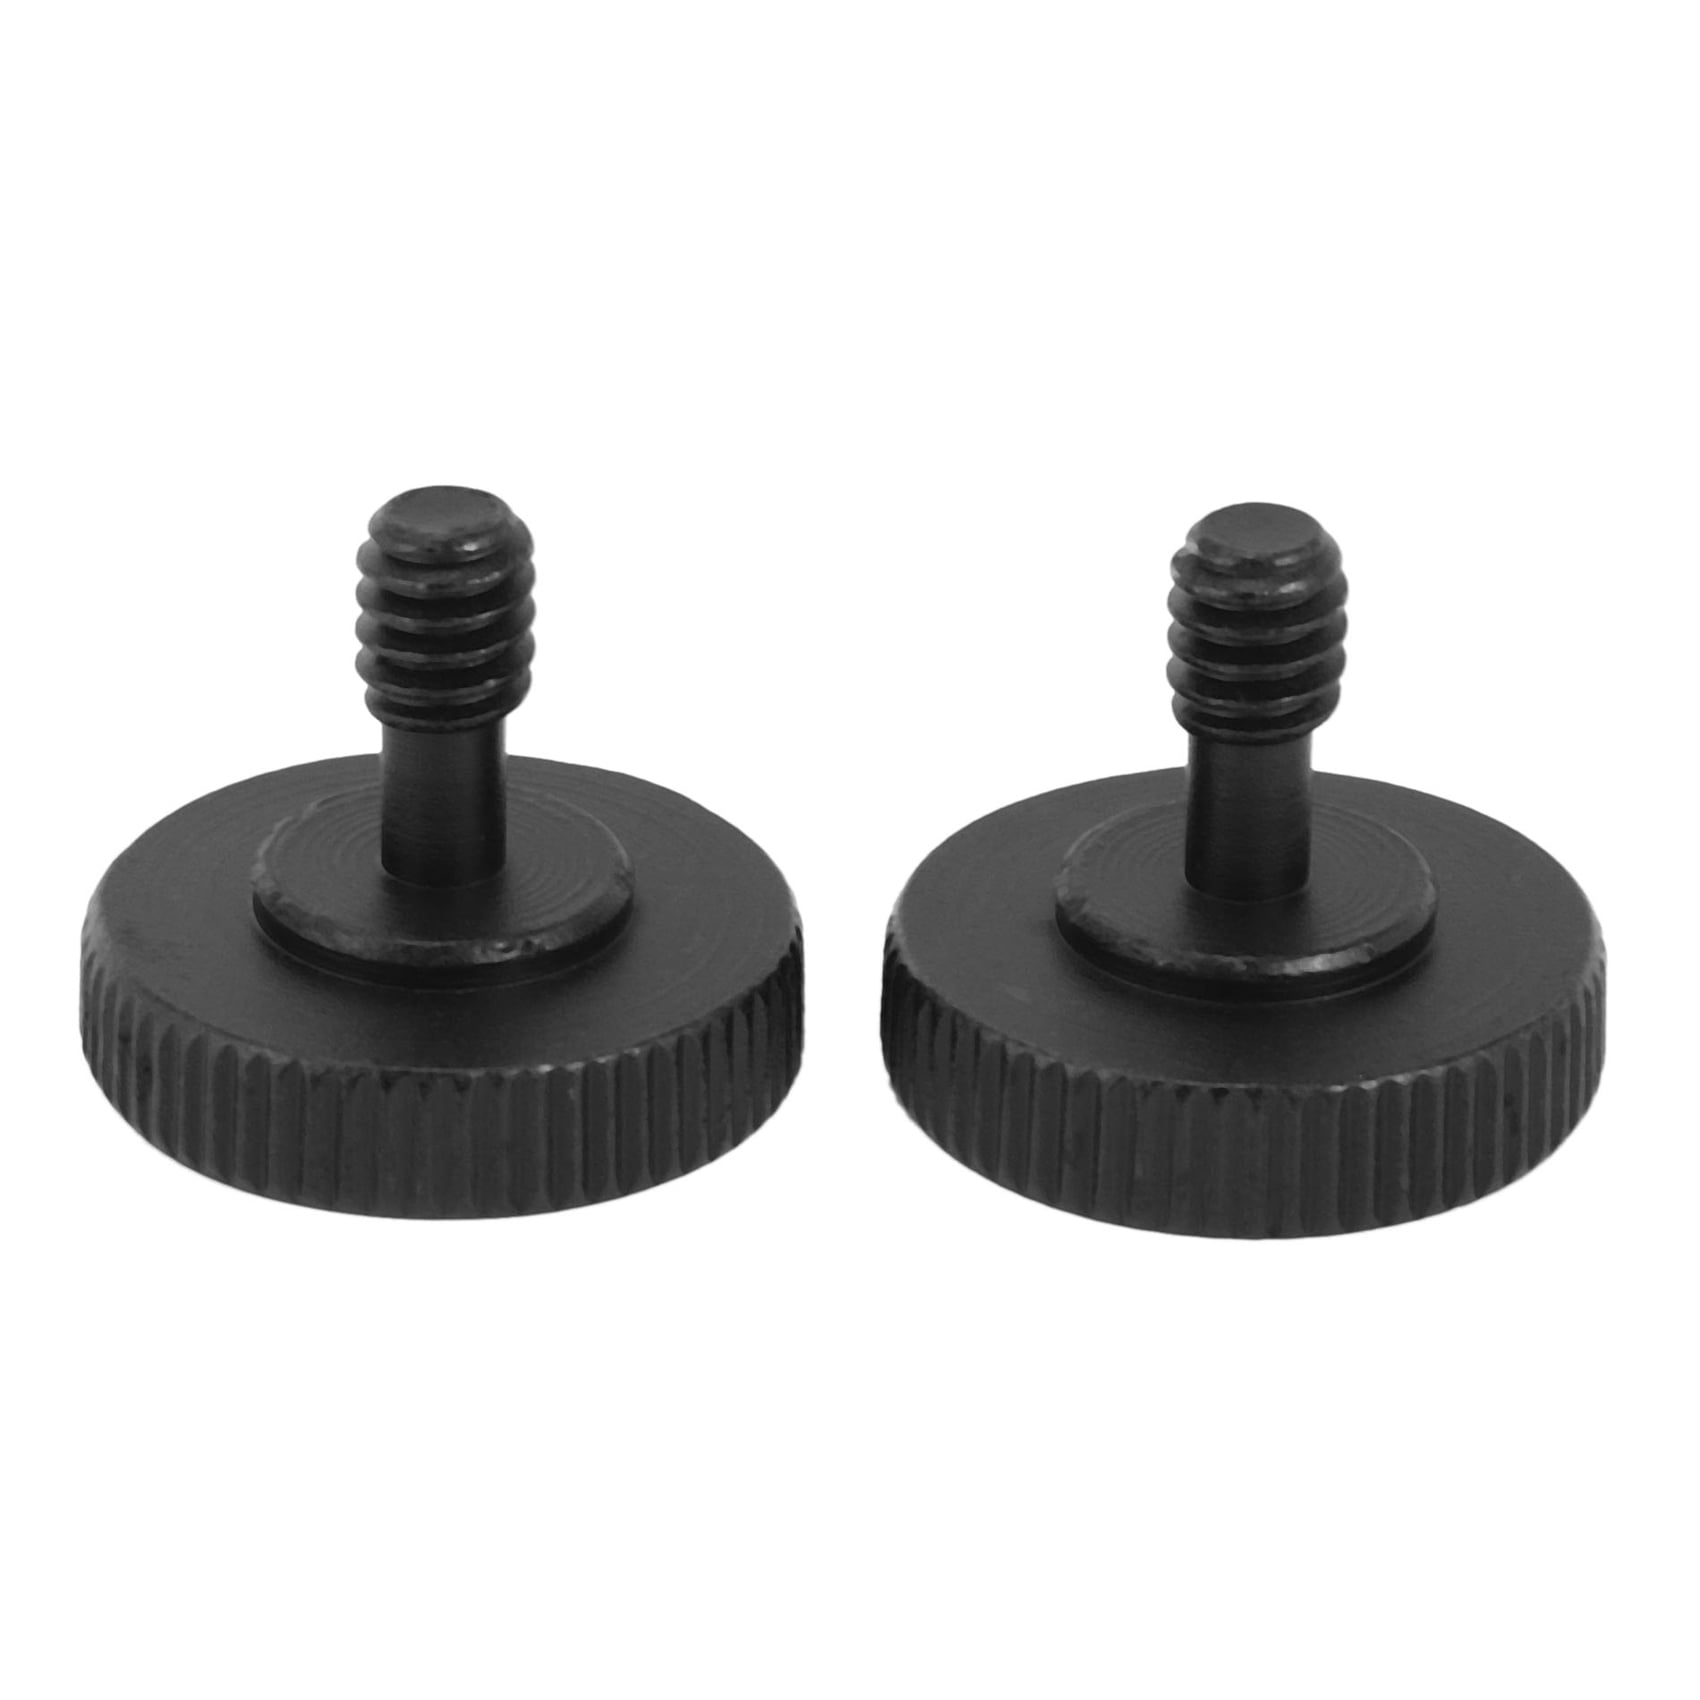 Details about   10x/set M8 Clear Nut Thumb Screw Suction Cups/Pad Suckers Turn Plastic /Rubber 